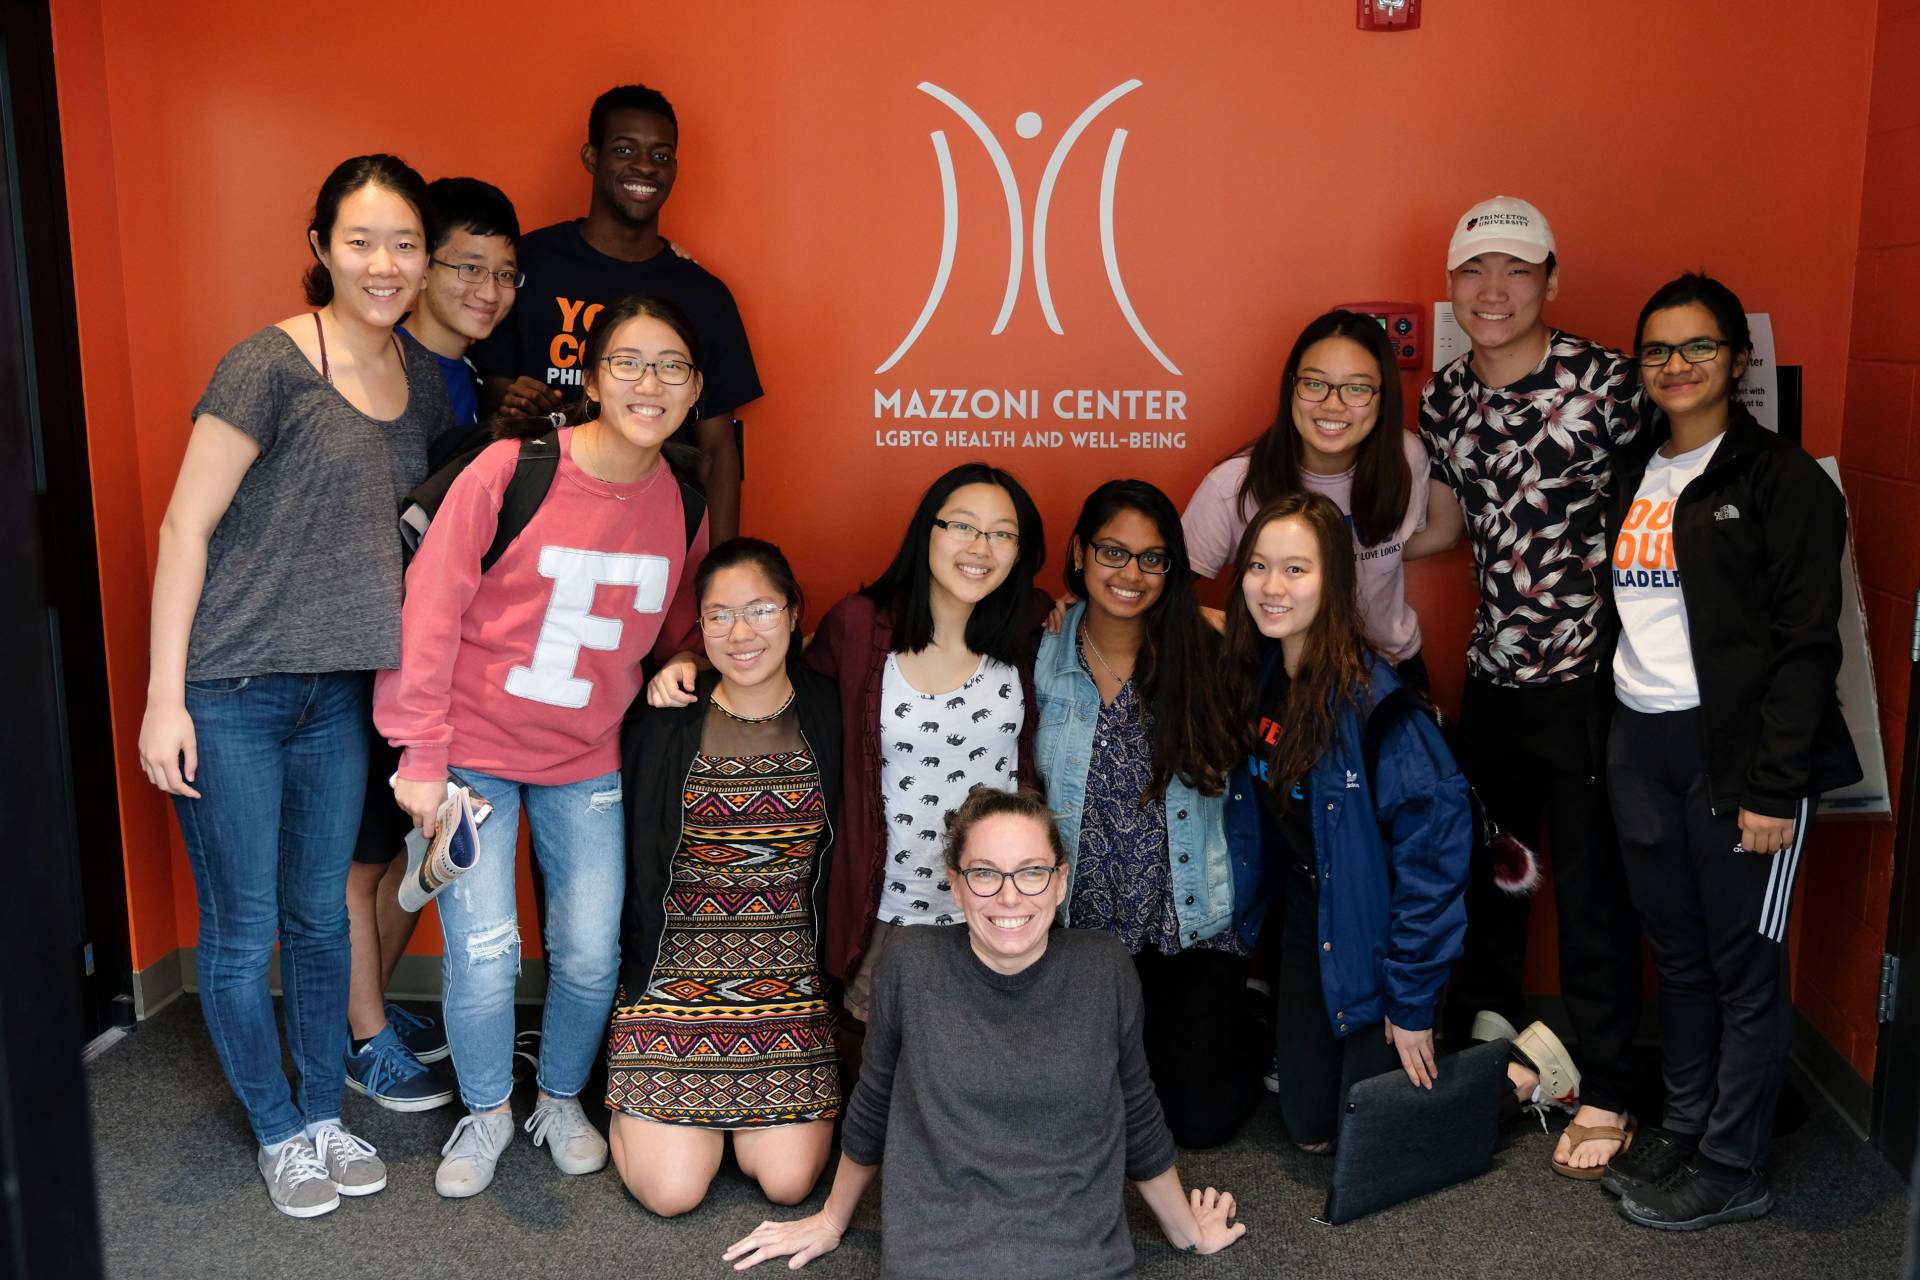 Students posing in front of Mazzoni Center sign